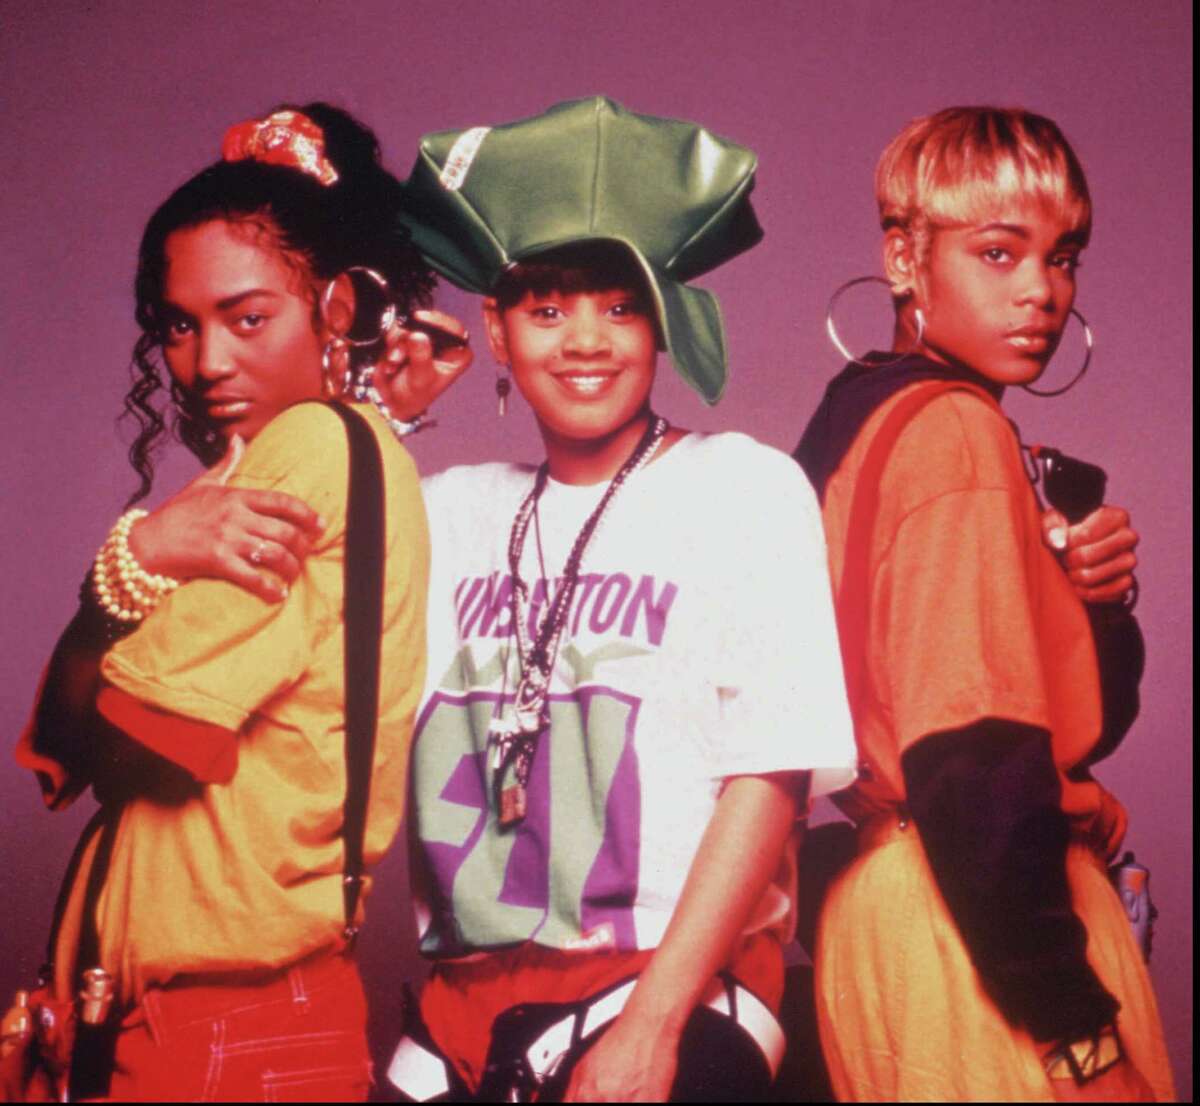 TLC stays true to its fans and the music